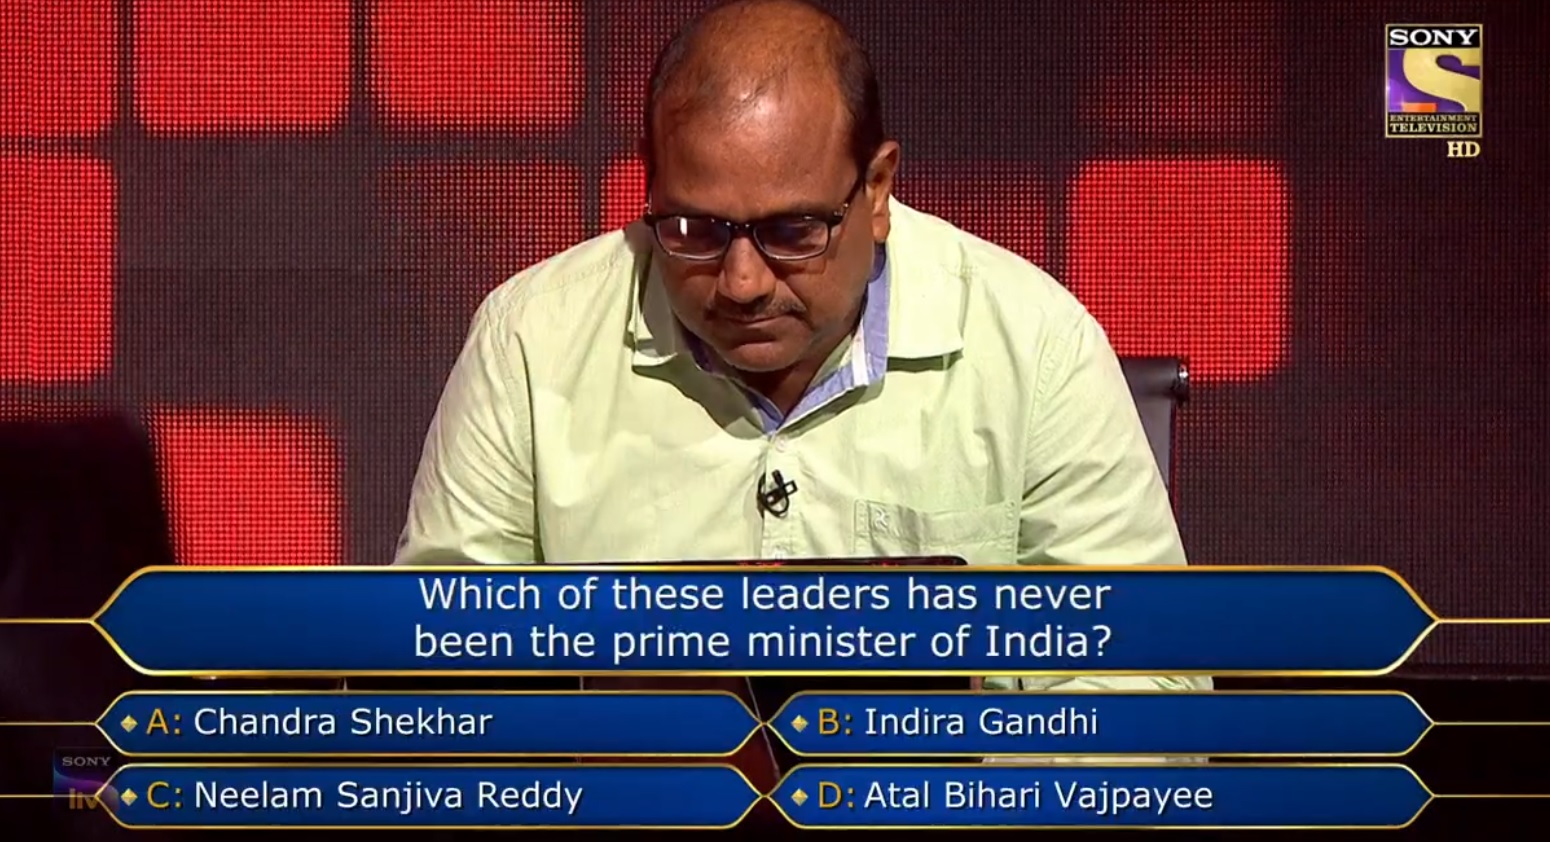 Ques : Which of these leaders has never been the prime minister of India?